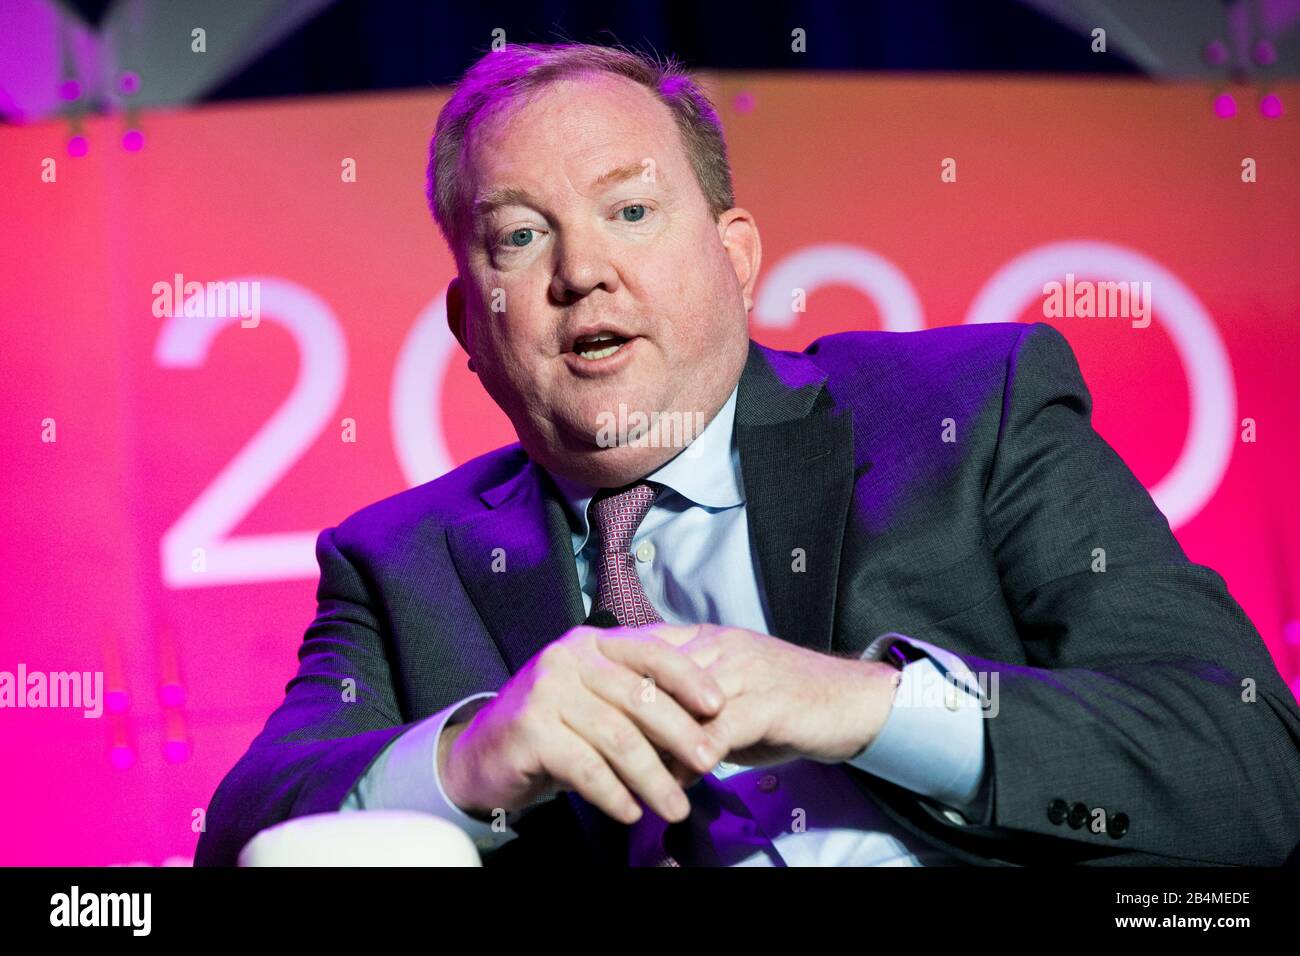 Stanley Deal, President und Chief Executive Officer, Boeing Commercial Airplanes und Executive Vice President, The Boeing Company, spricht in den USA Stockfoto